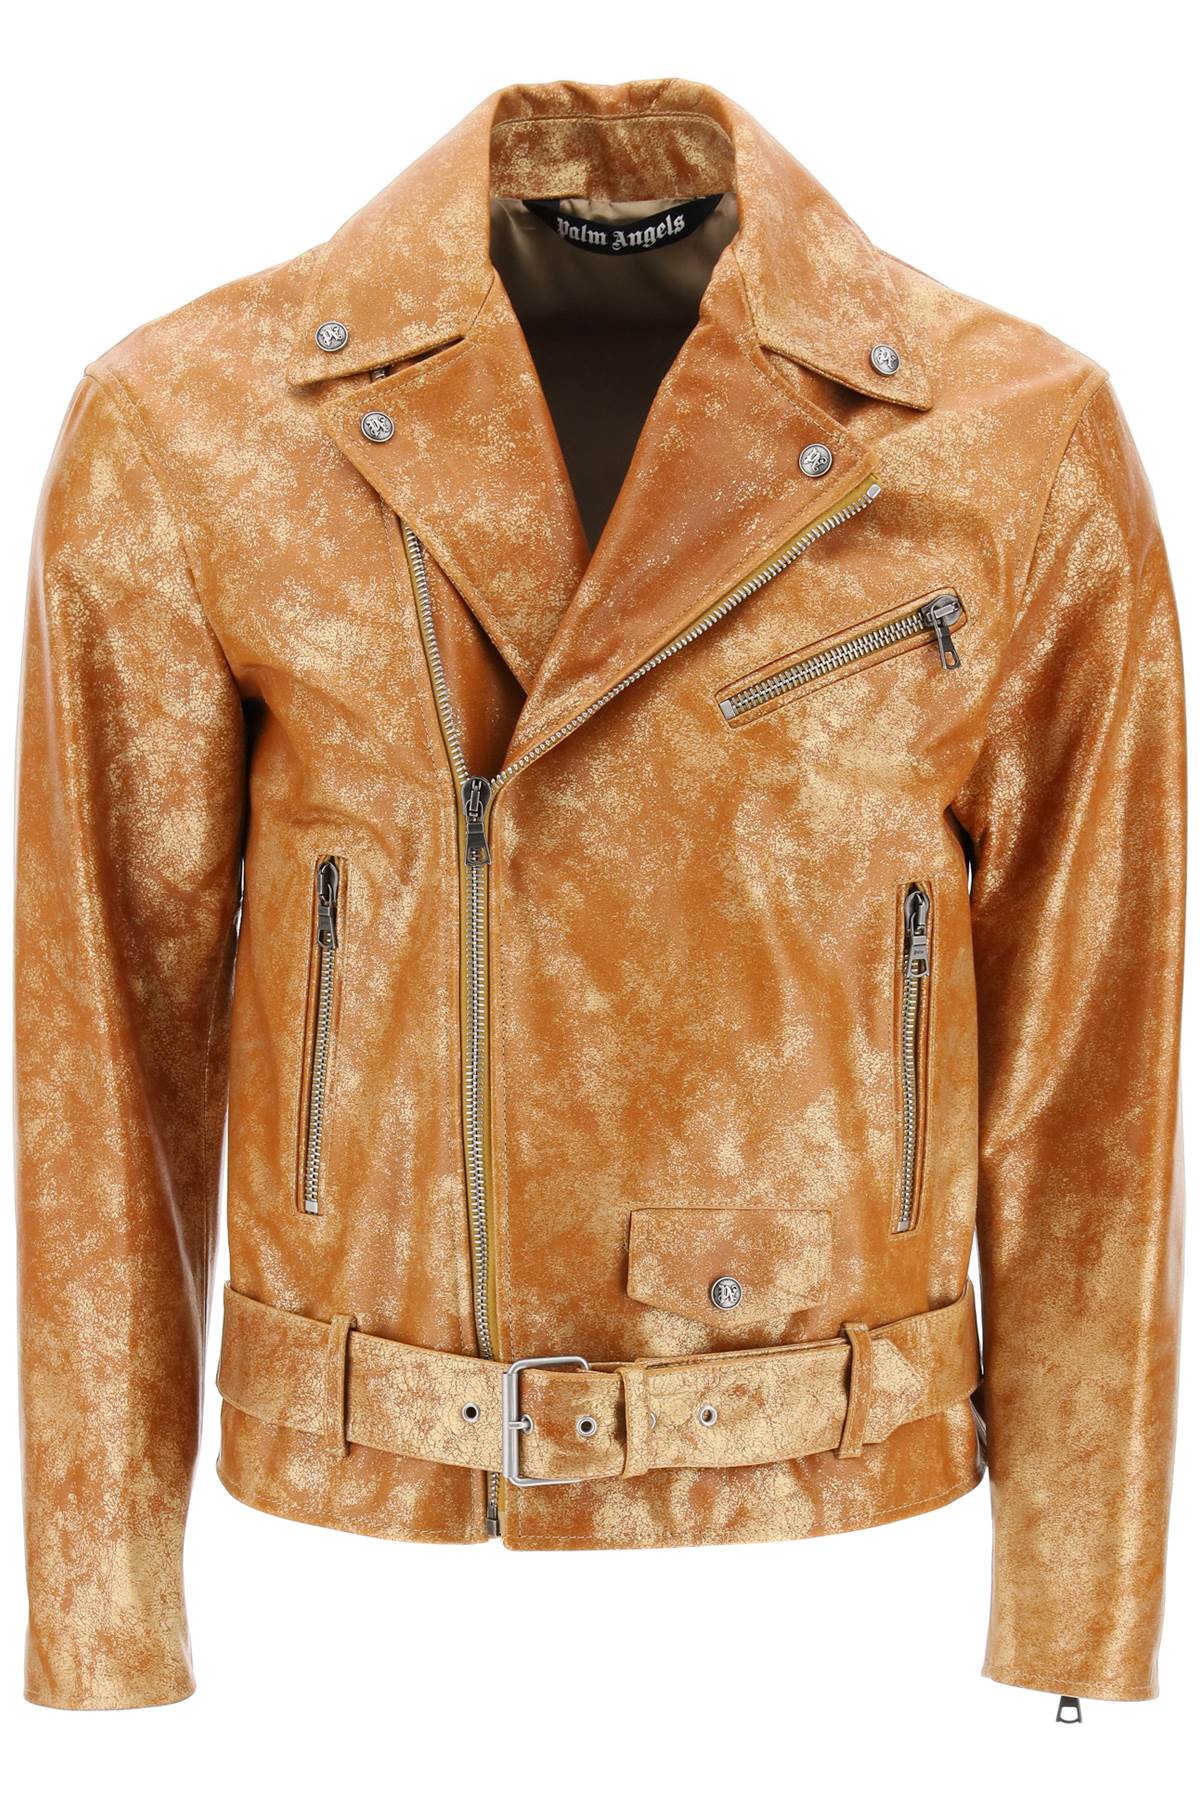 City Biker Jacket in Laminated Leather with Palm Angels Print